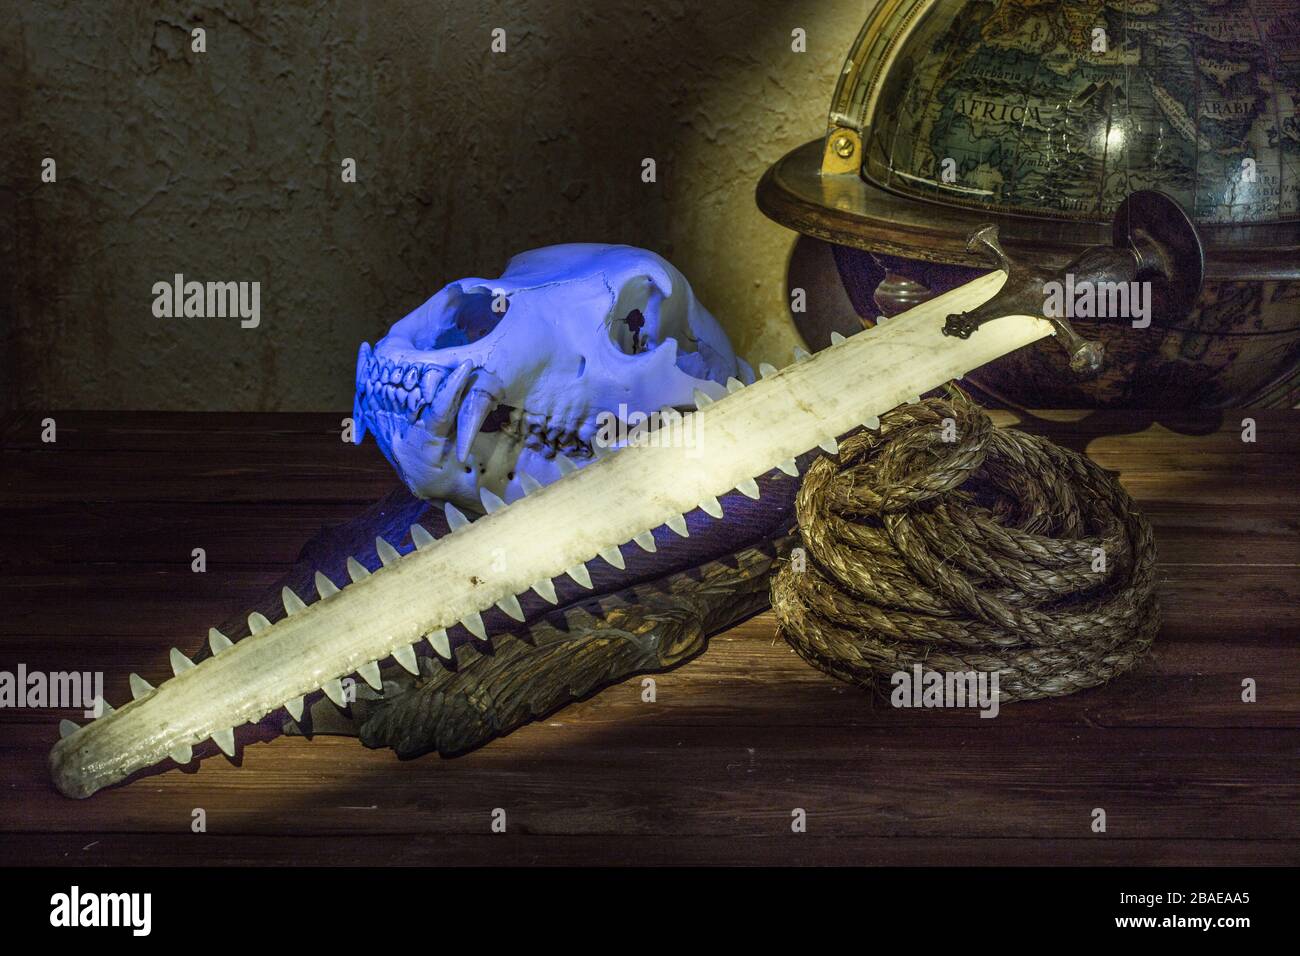 Stlll life of the 19th century sea voyage with old indian talvar (sabre), rope, globe and bear's skull. Stock Photo